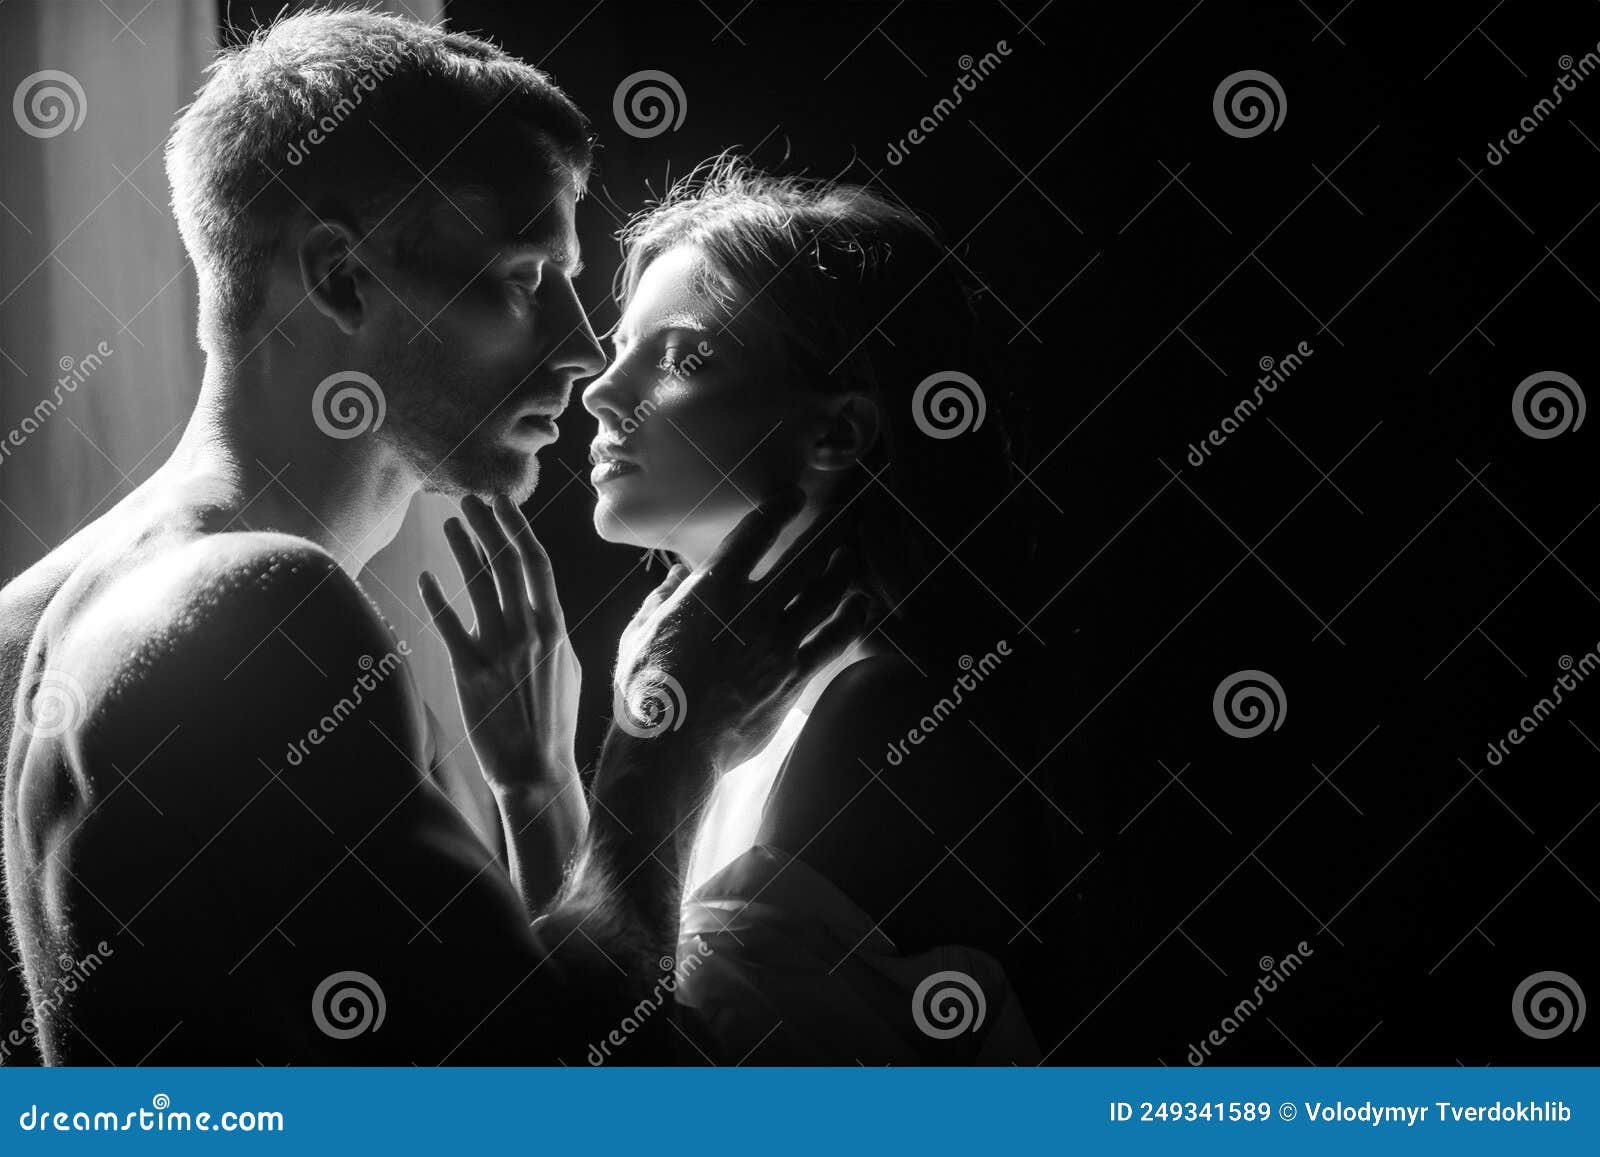 Blow Air Kiss By One Hand Stock Photo 650536909 | Shutterstock